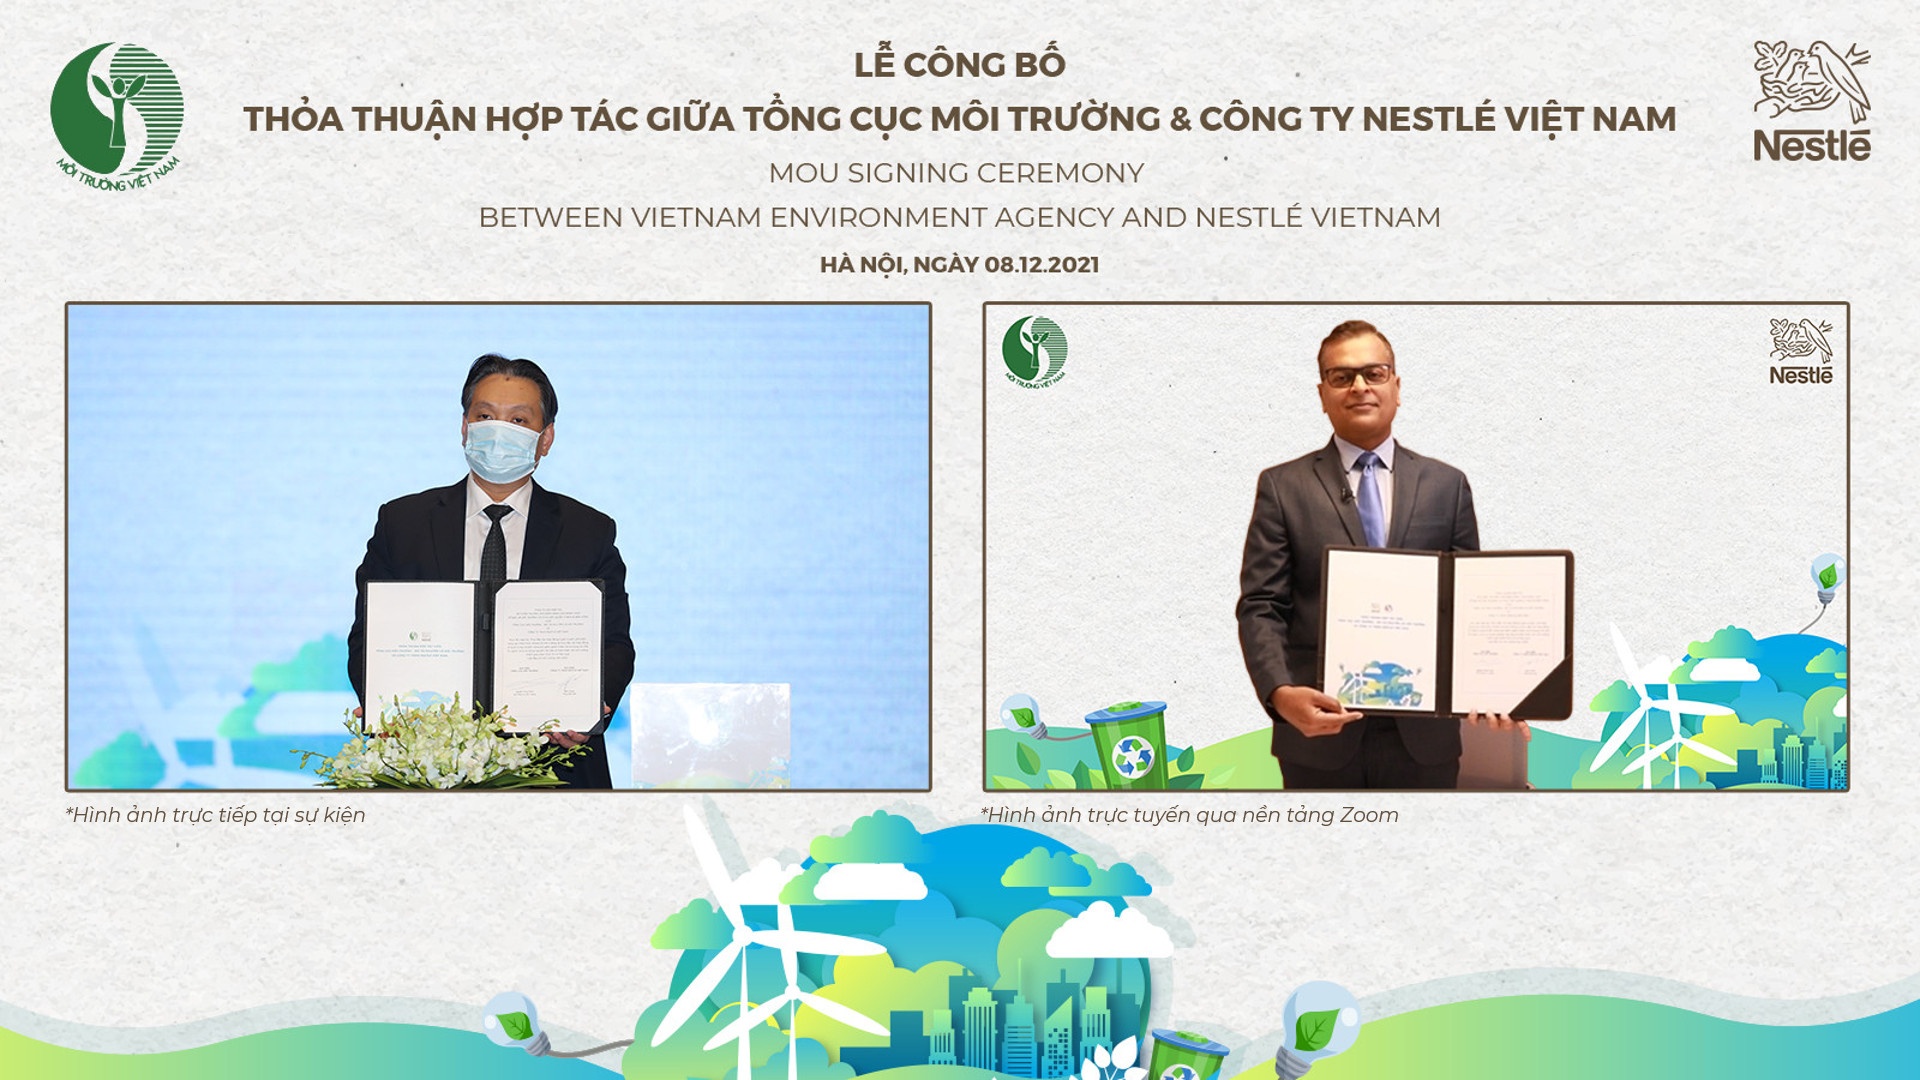 Delegates attending the signing ceremony of cooperation agreement between Vietnam Environment Agency and Nestlé Vietnam